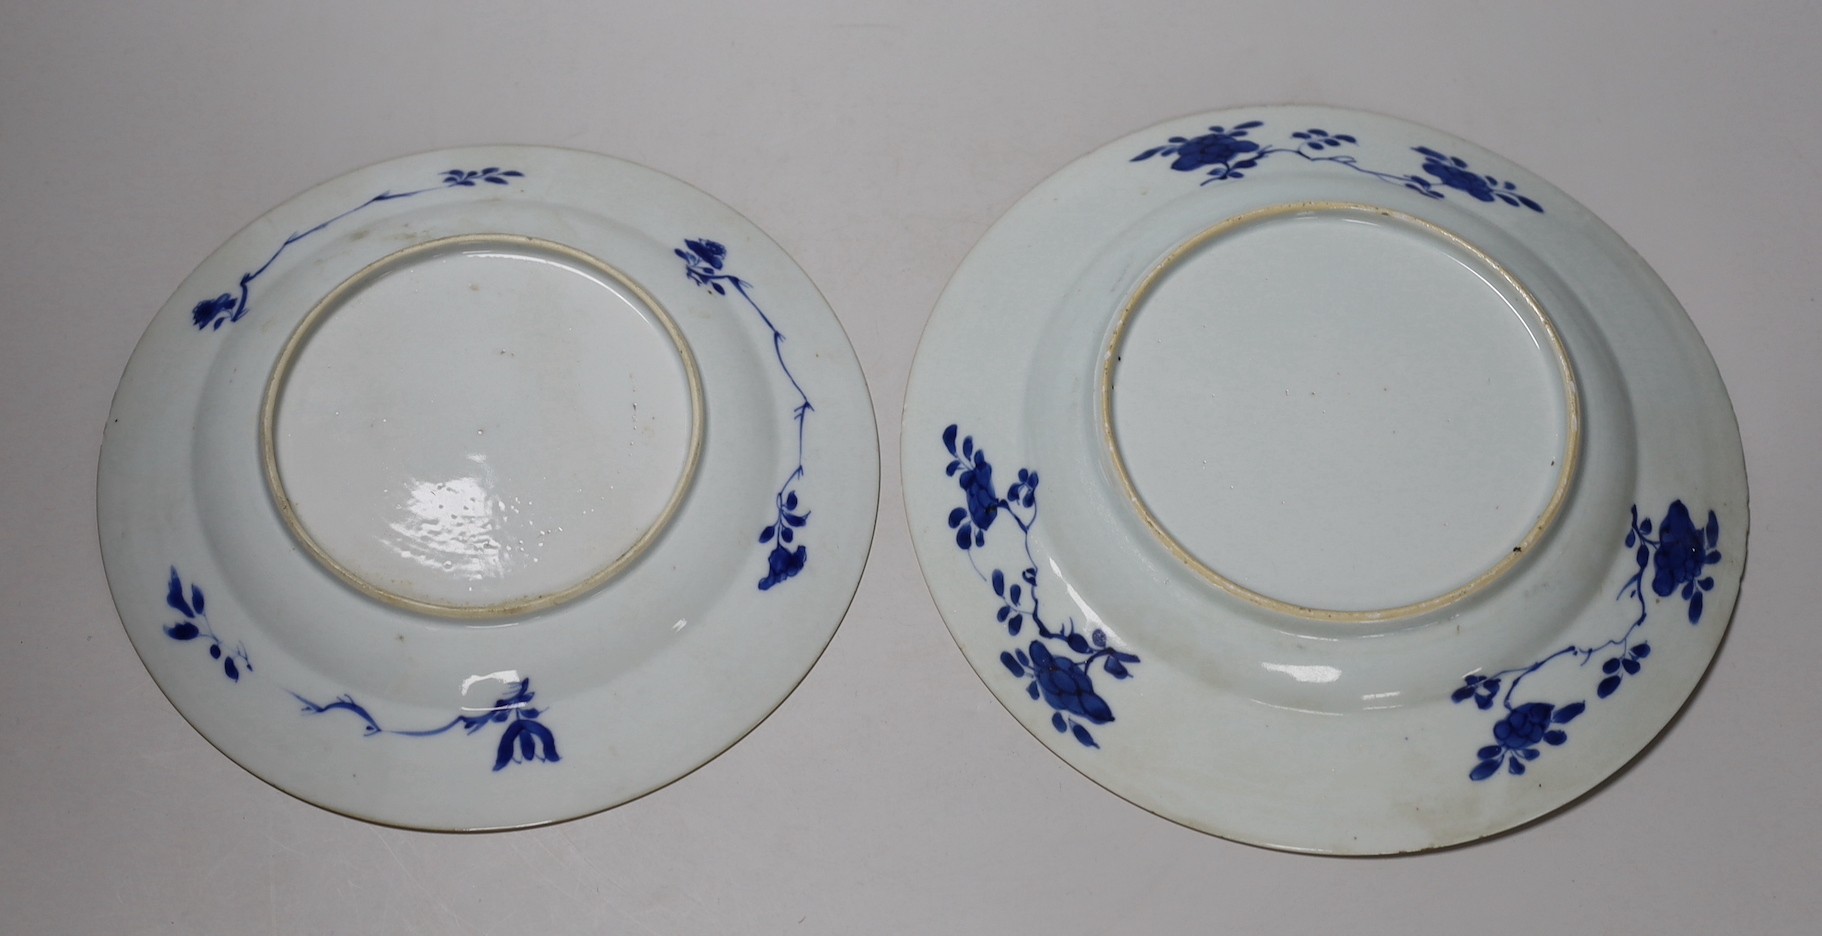 Two Chinese blue and white ‘dancing boy’ dishes, Kangxi period, largest 24.5cm, one with a border of Antiques, the other with foliage